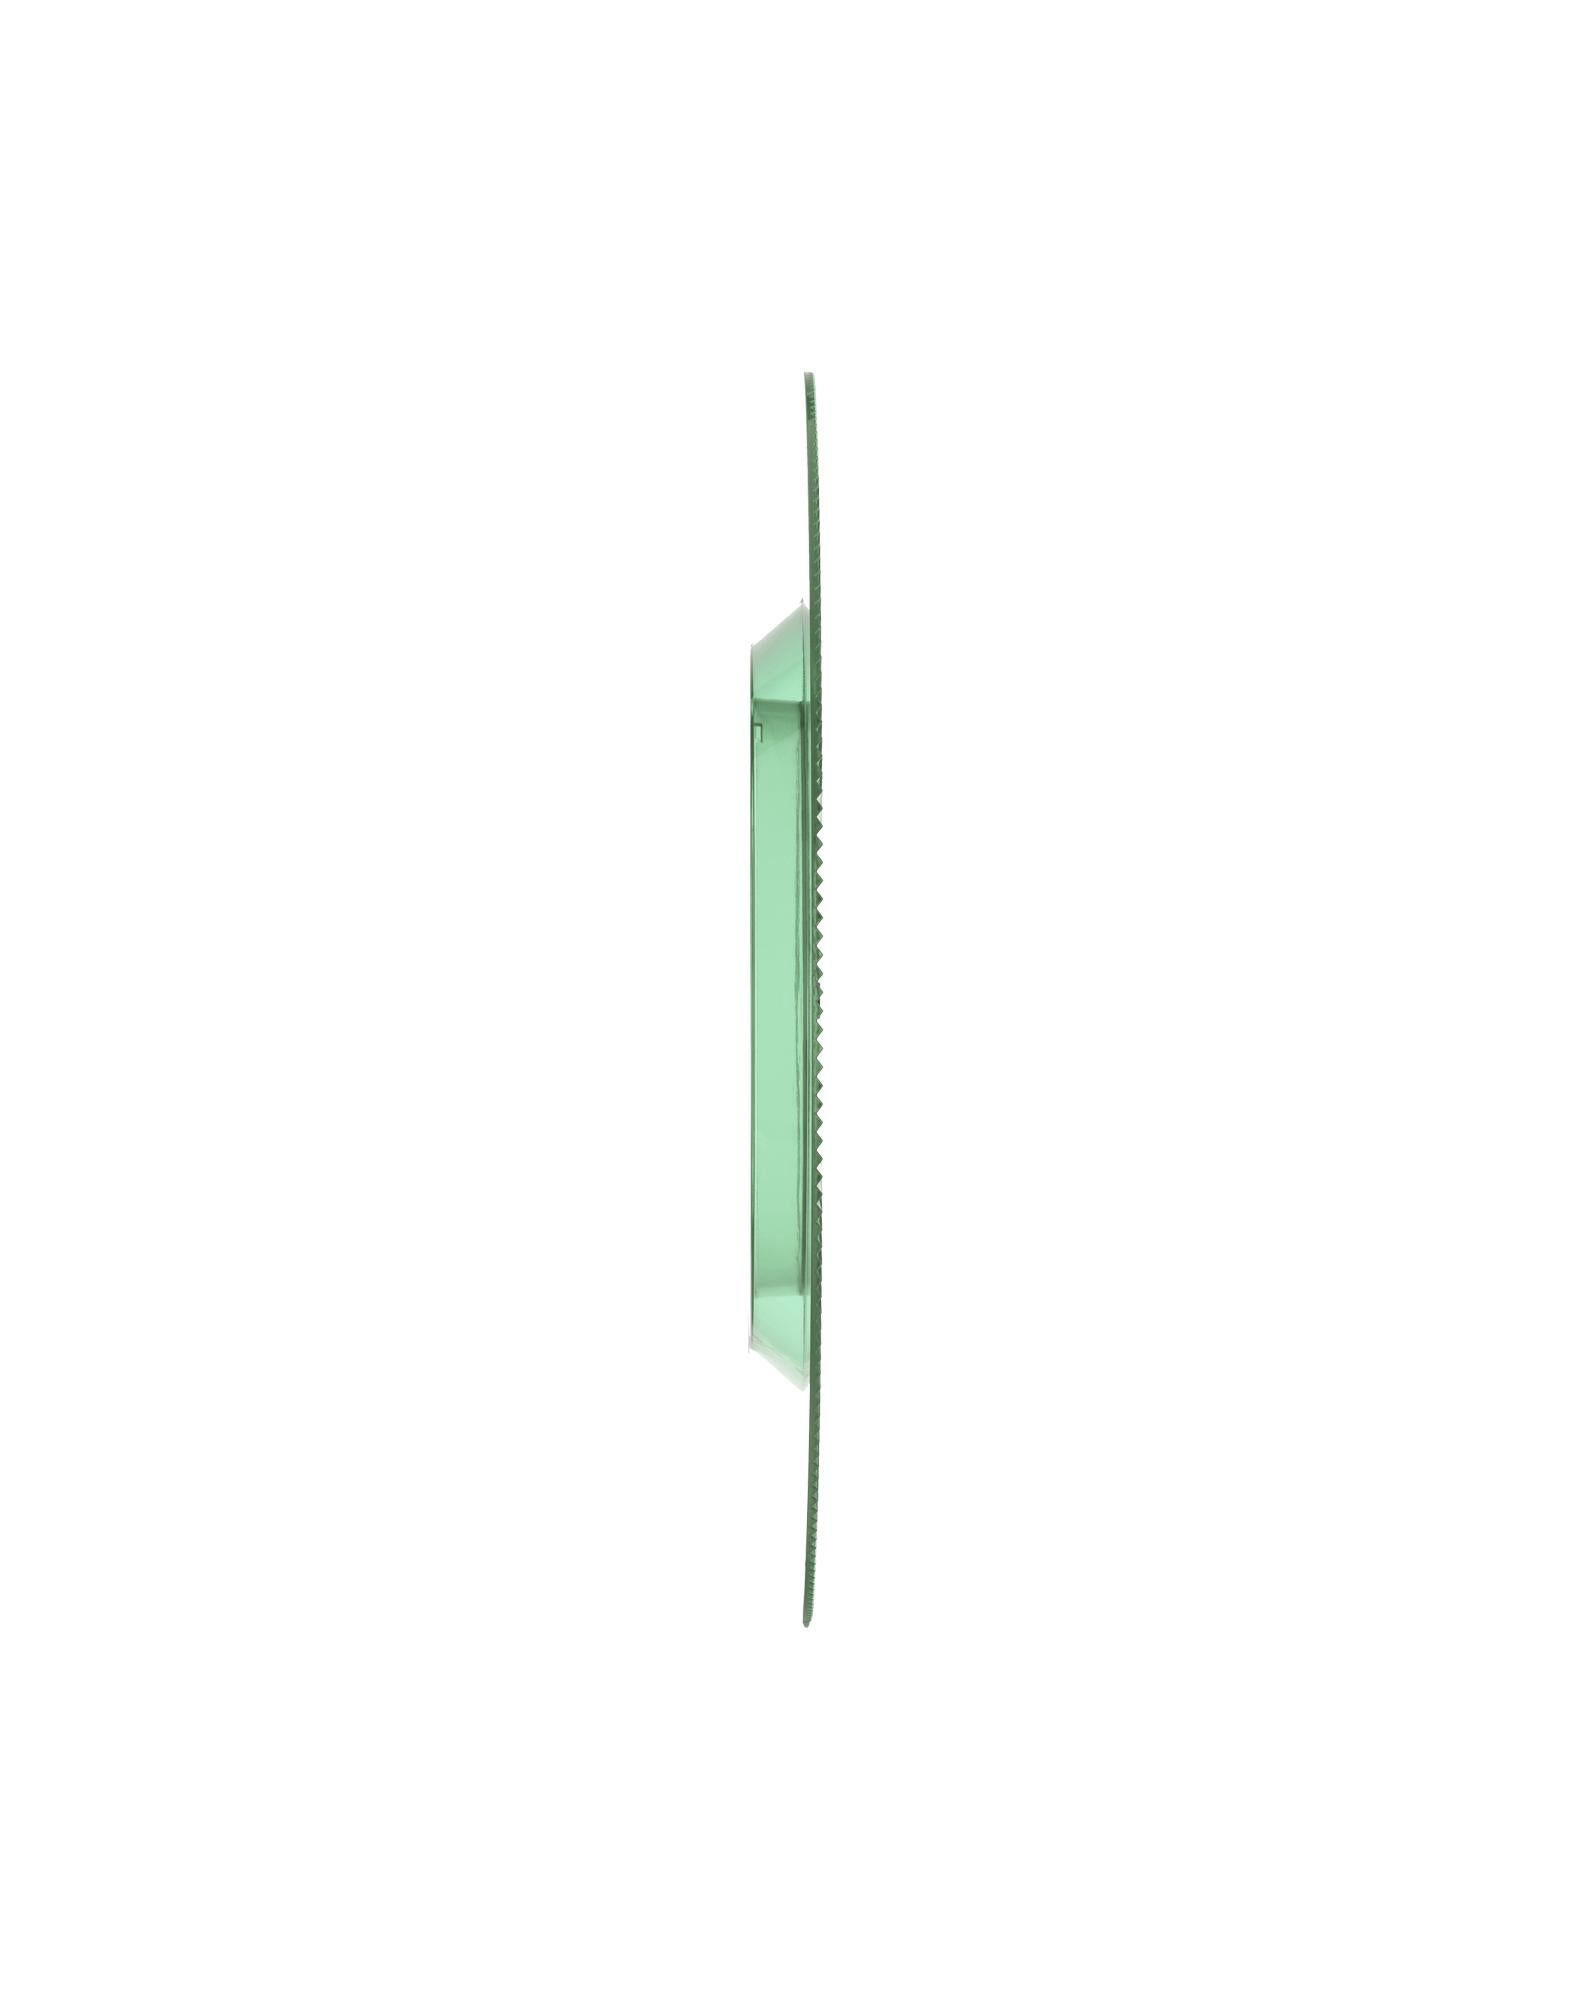 Modern Kartell All Saints Mirror in Aquamarine by Ludovica and Roberto Palomba For Sale